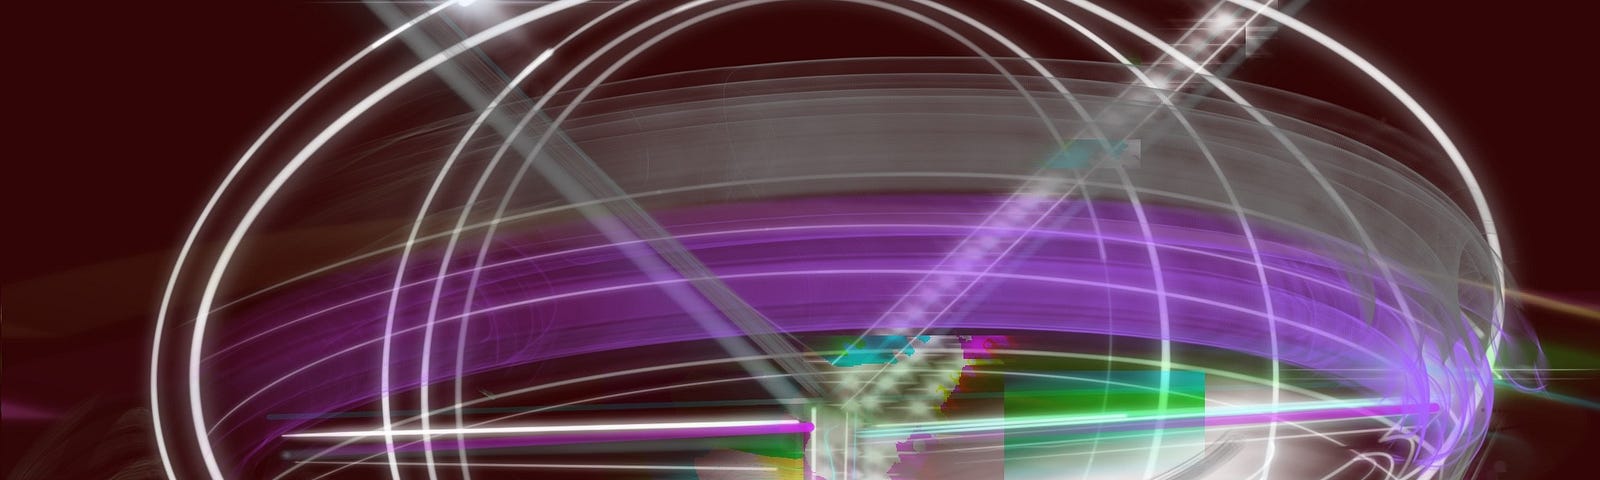 Artistic rendition of “The Quantum Bus of Light,” an interdimensional time machine invented by Farmer Josh (Procreate on iPad)